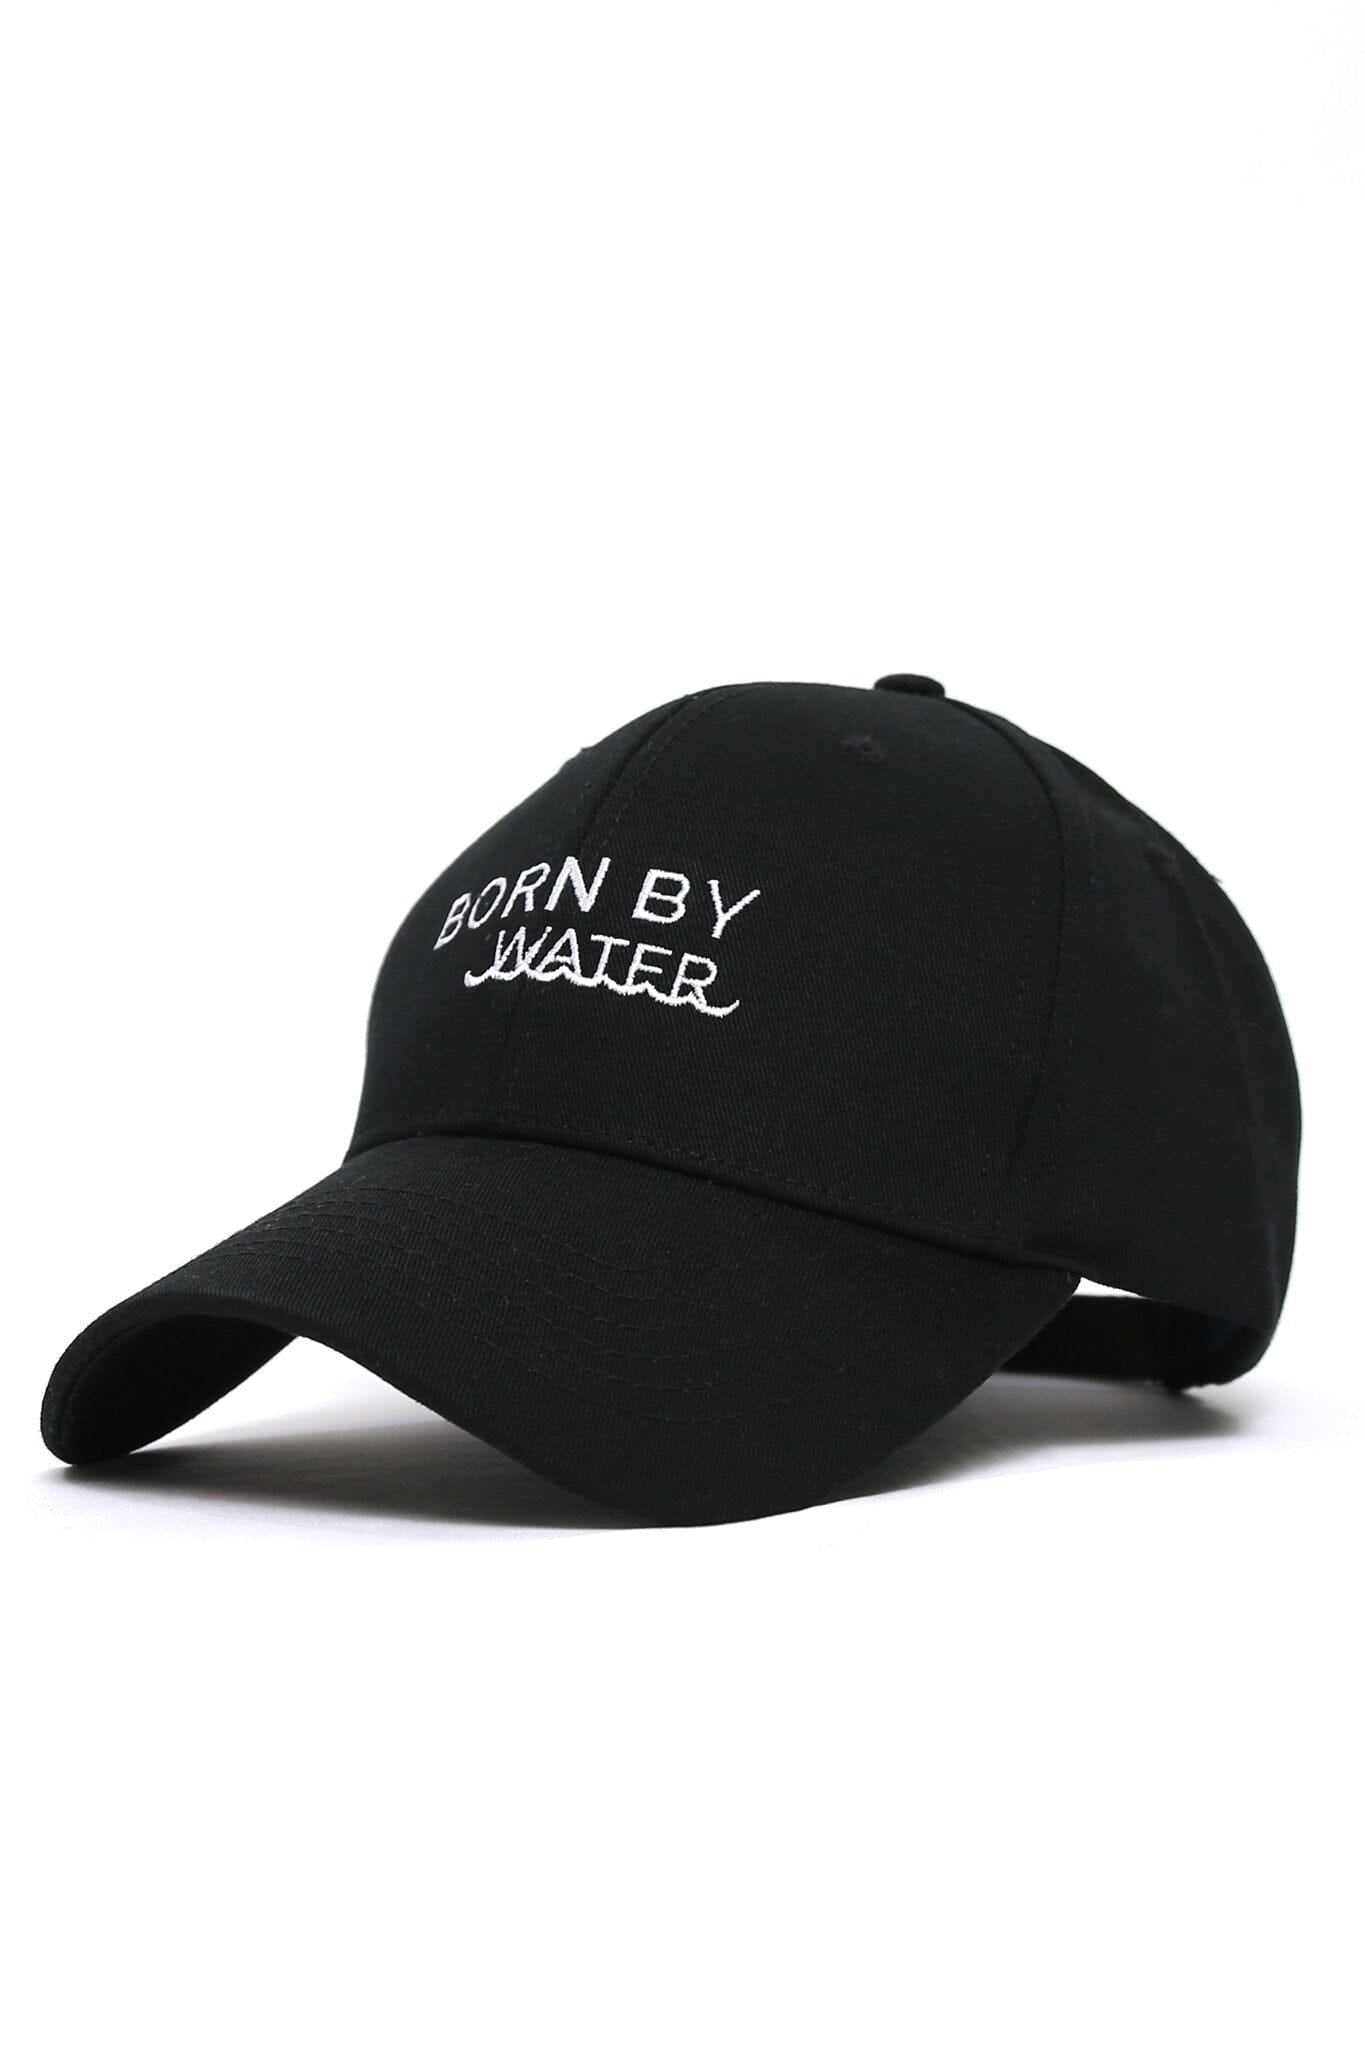 BORN BY WATER WAVES CAP - B-BLACK - OS